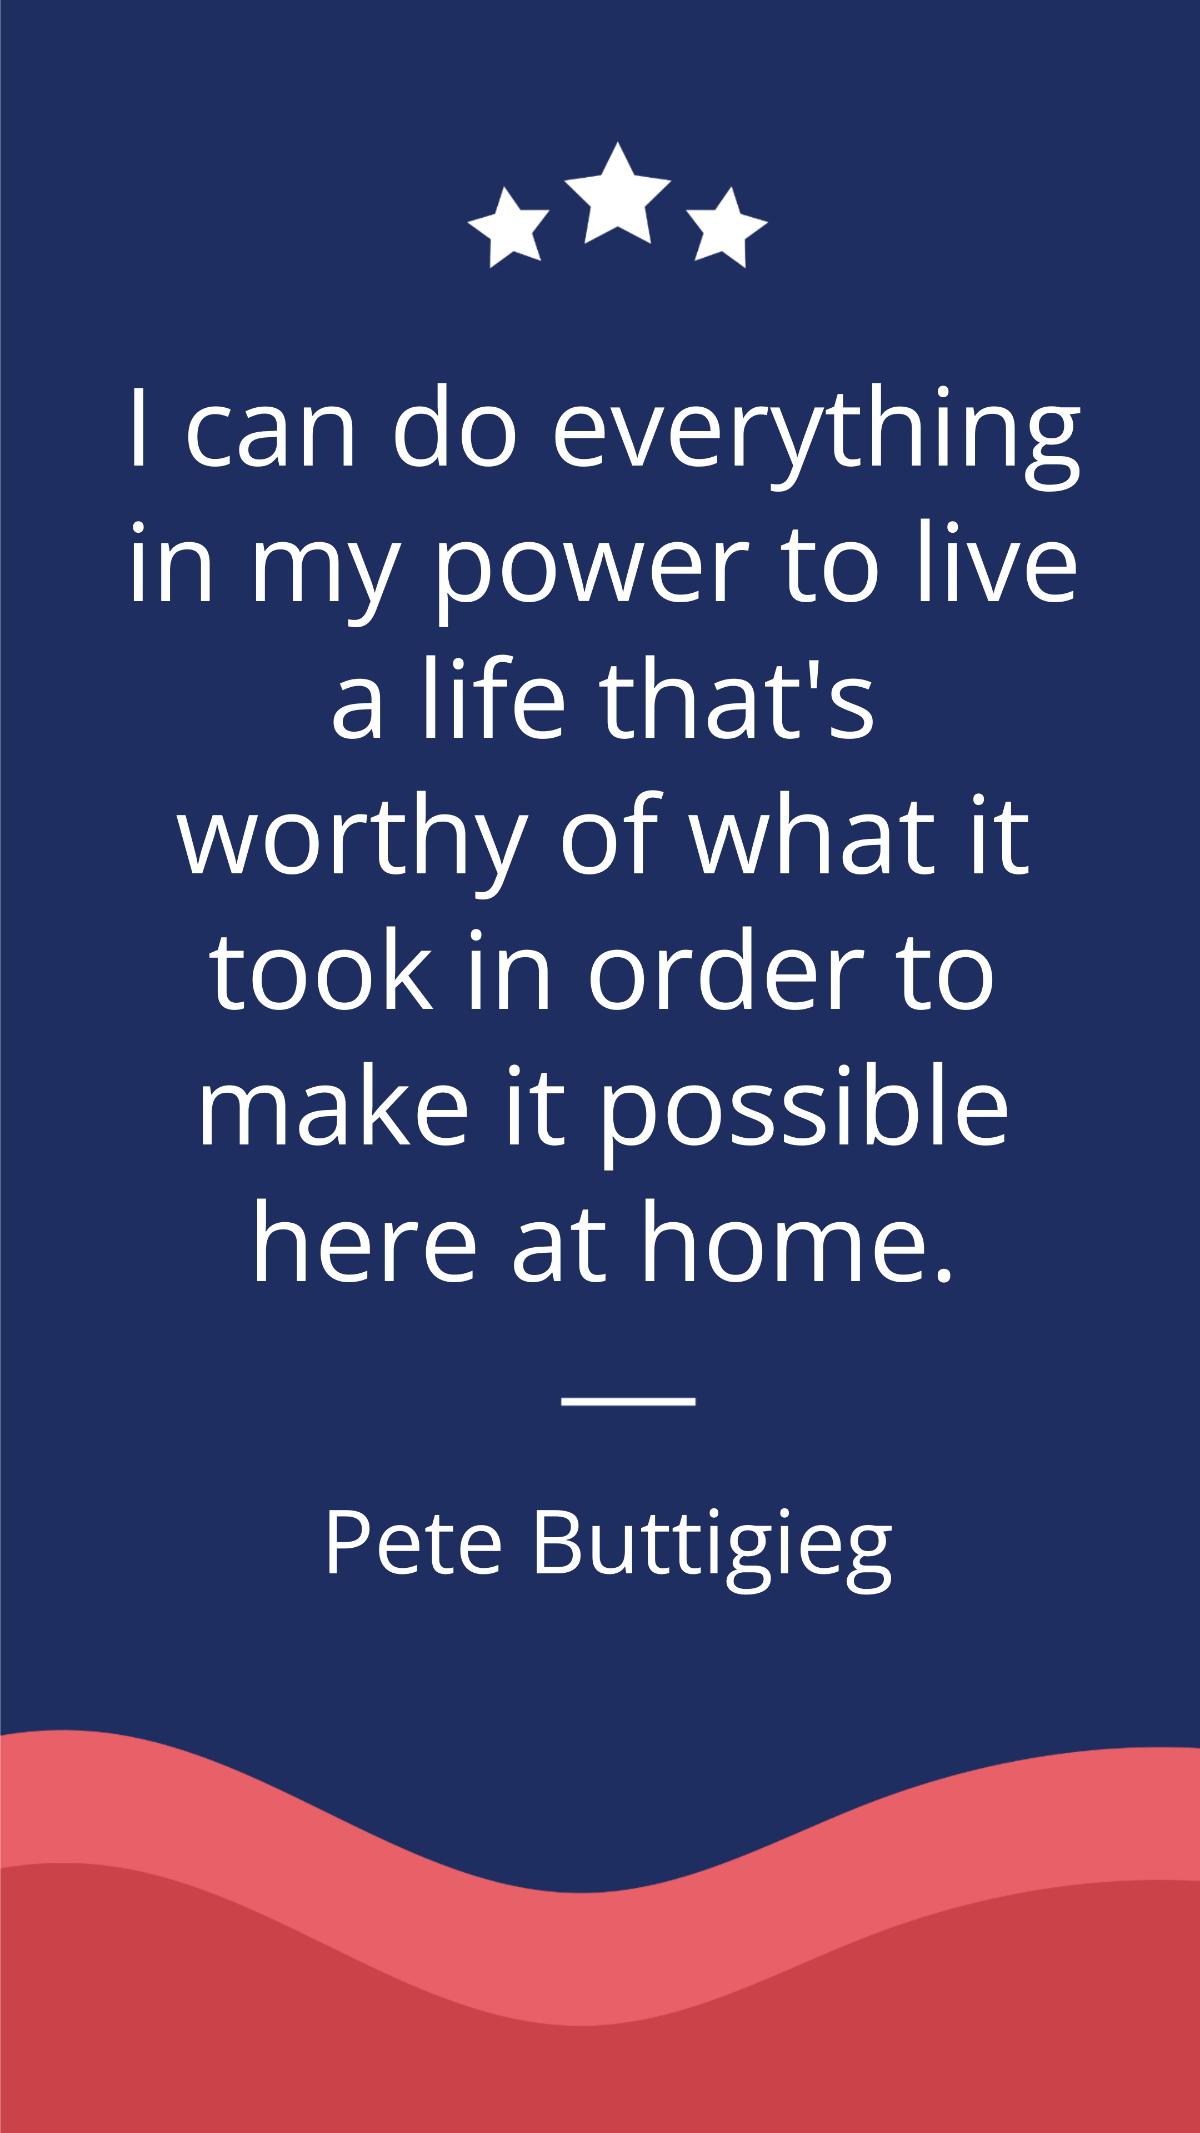 Free Pete Buttigieg - I can do everything in my power to live a life that's worthy of what it took in order to make it possible to be here at home. Template